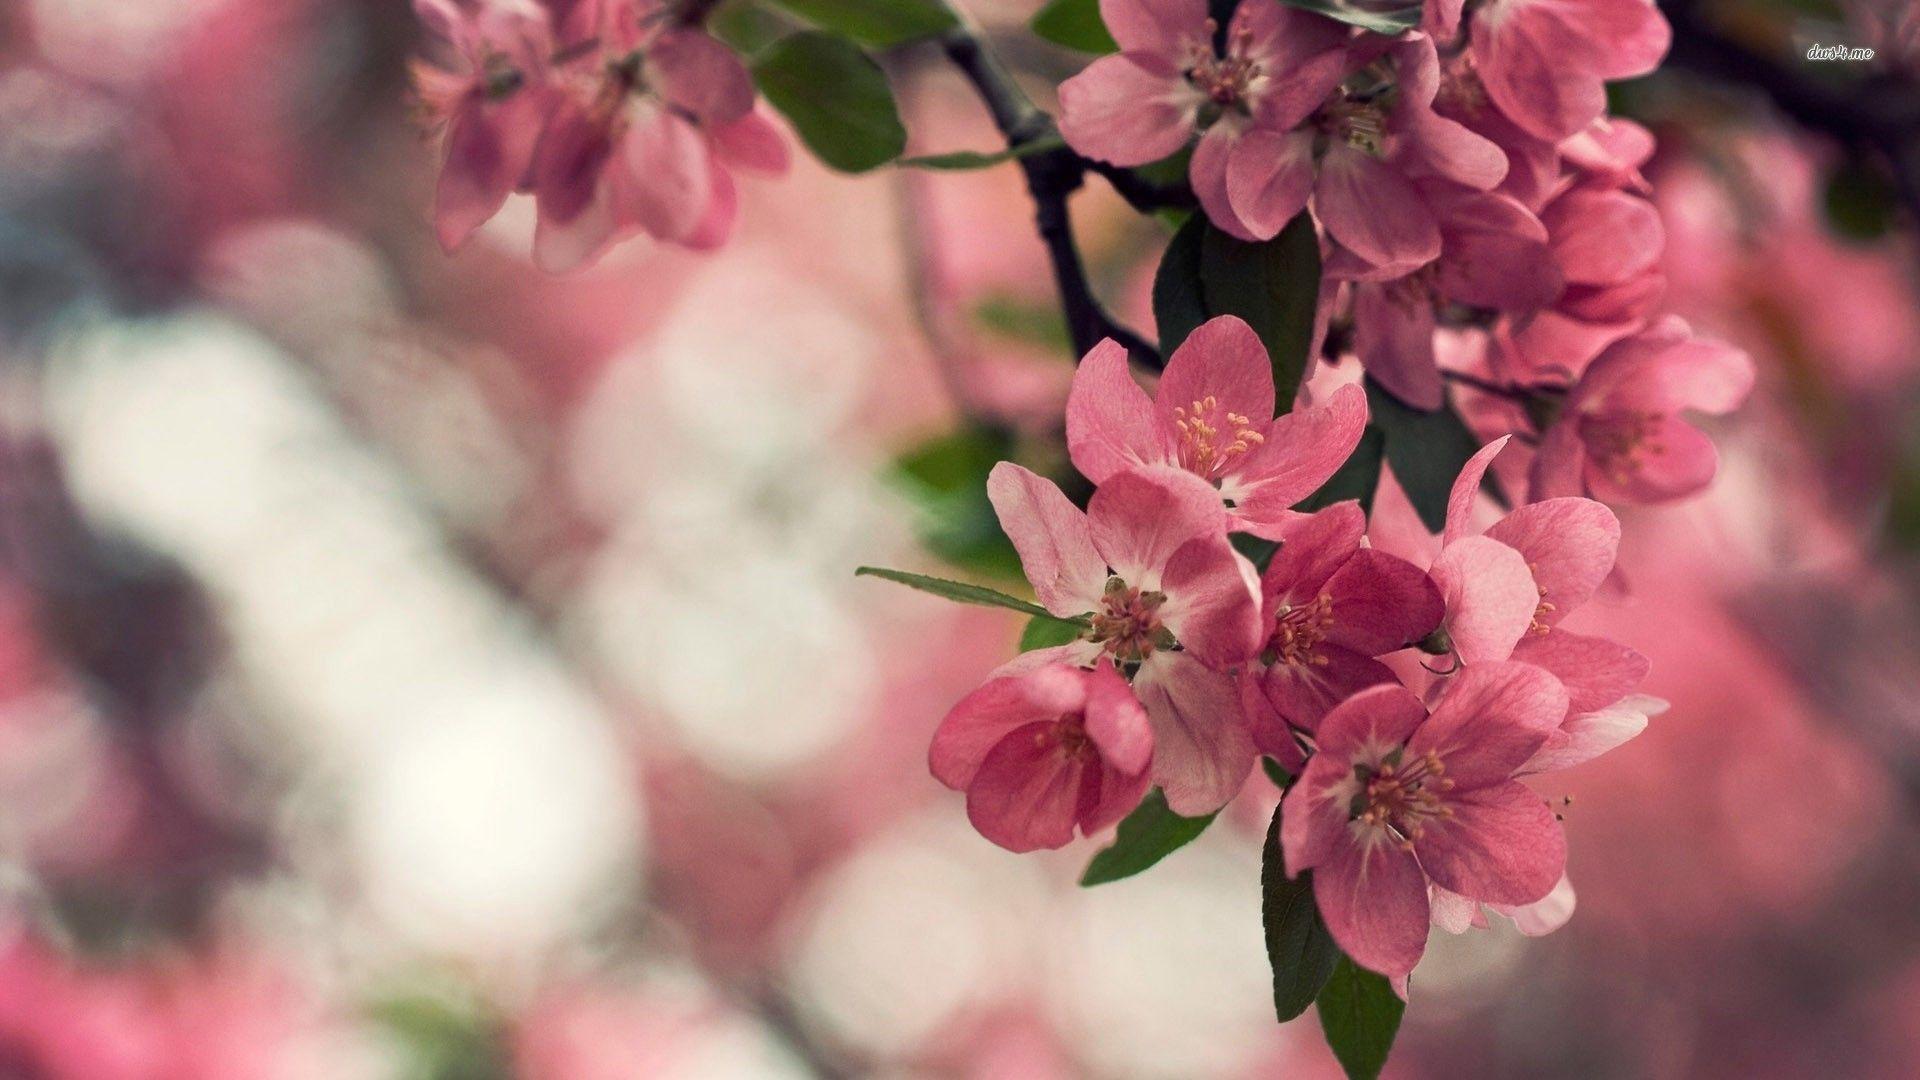 Cherry Blossoms Image Search Results. Trees